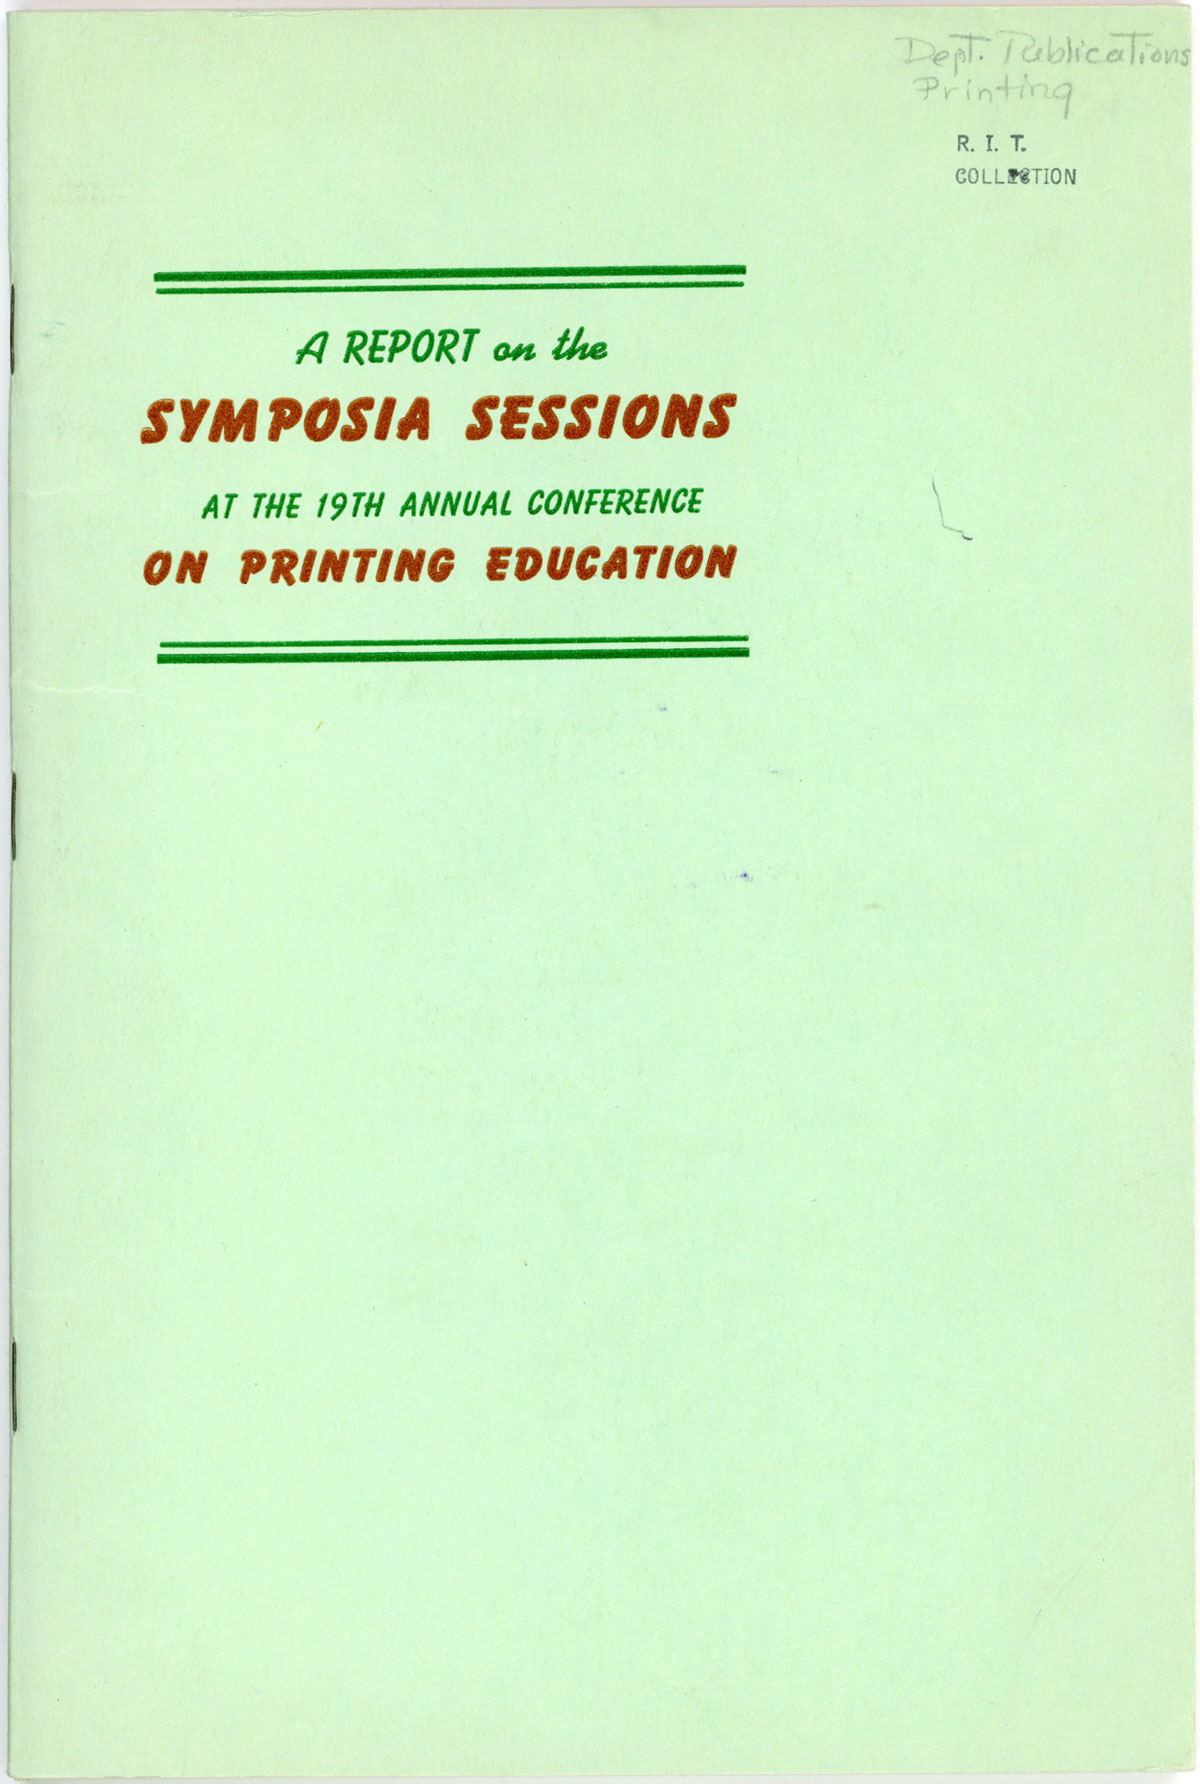 A report on the Symposia Sessions at the 19th annual conference on printing education